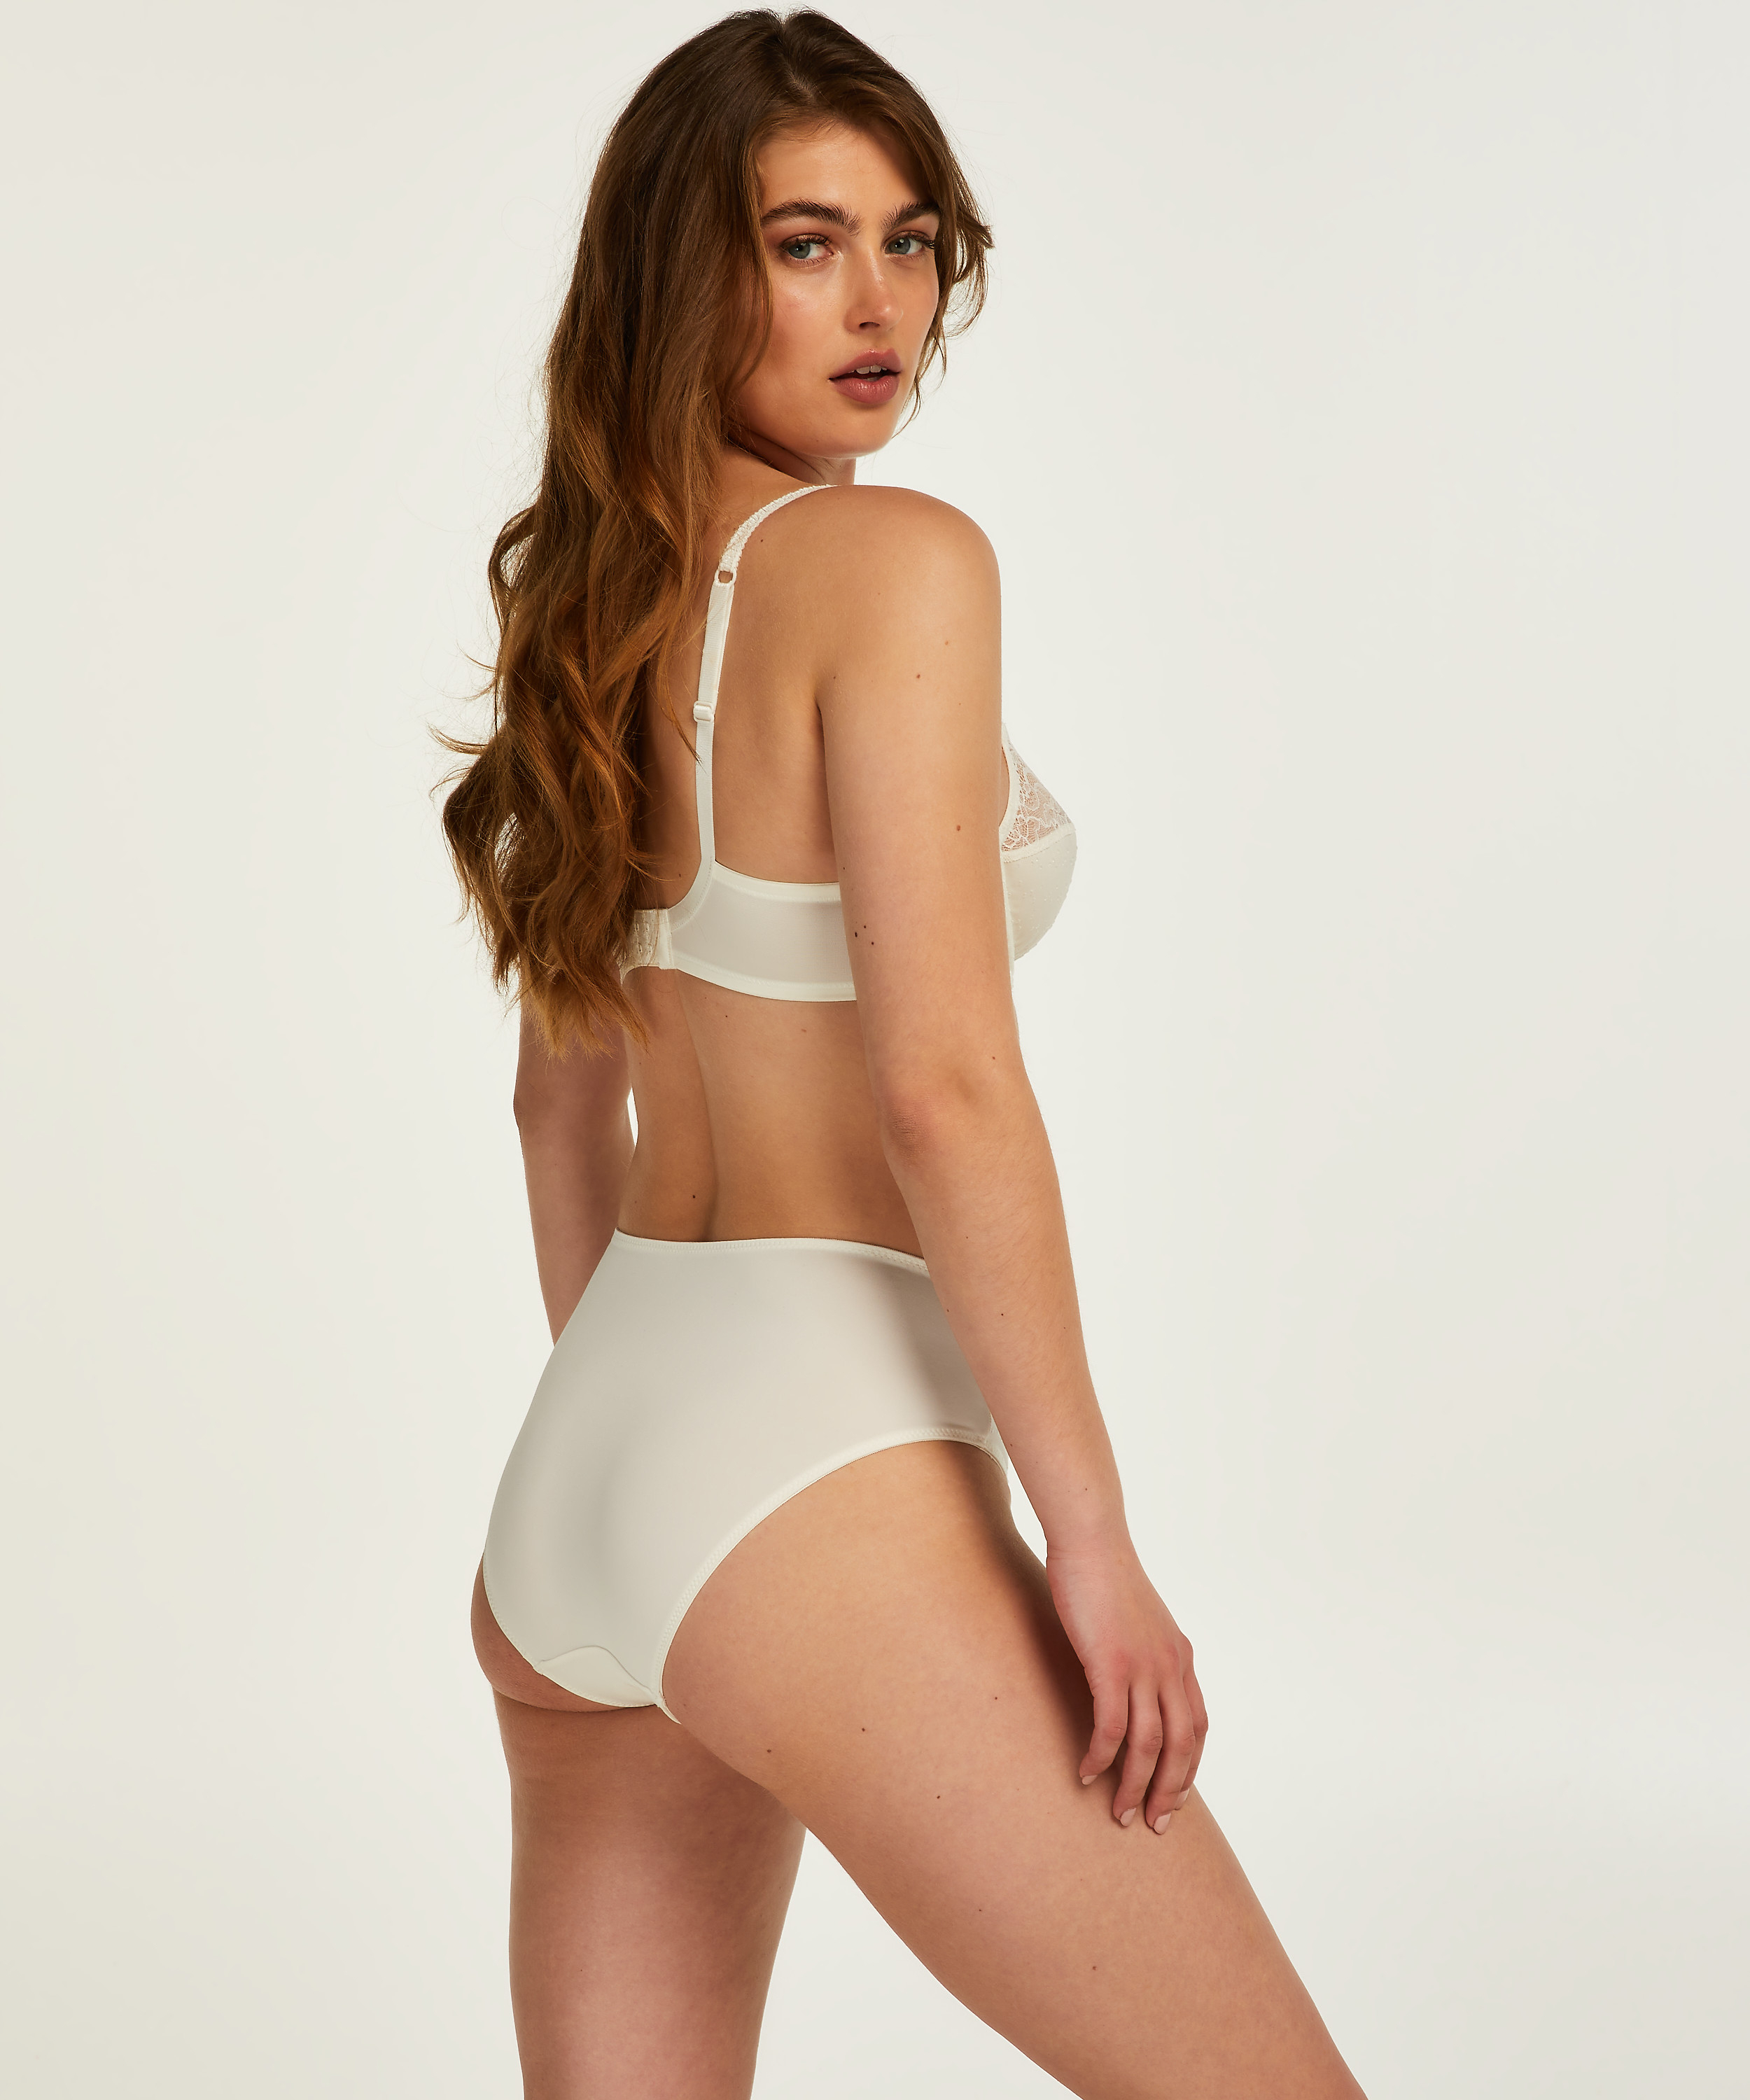 Sophie high knickers, White, main